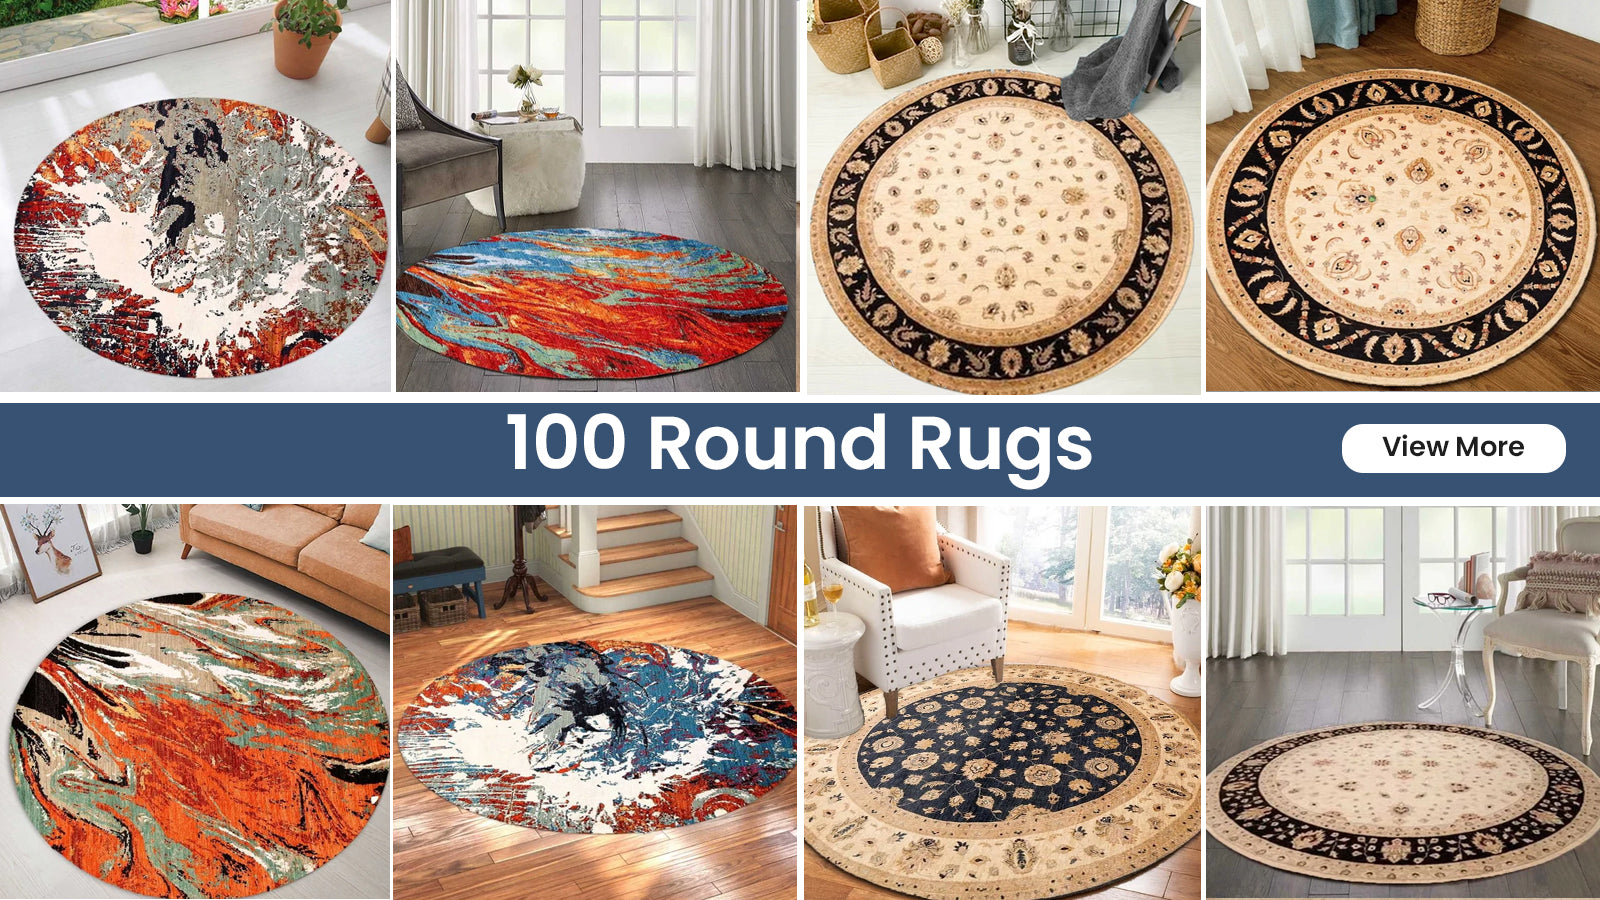 Shop Round Hooked Rugs at The Rug Corner